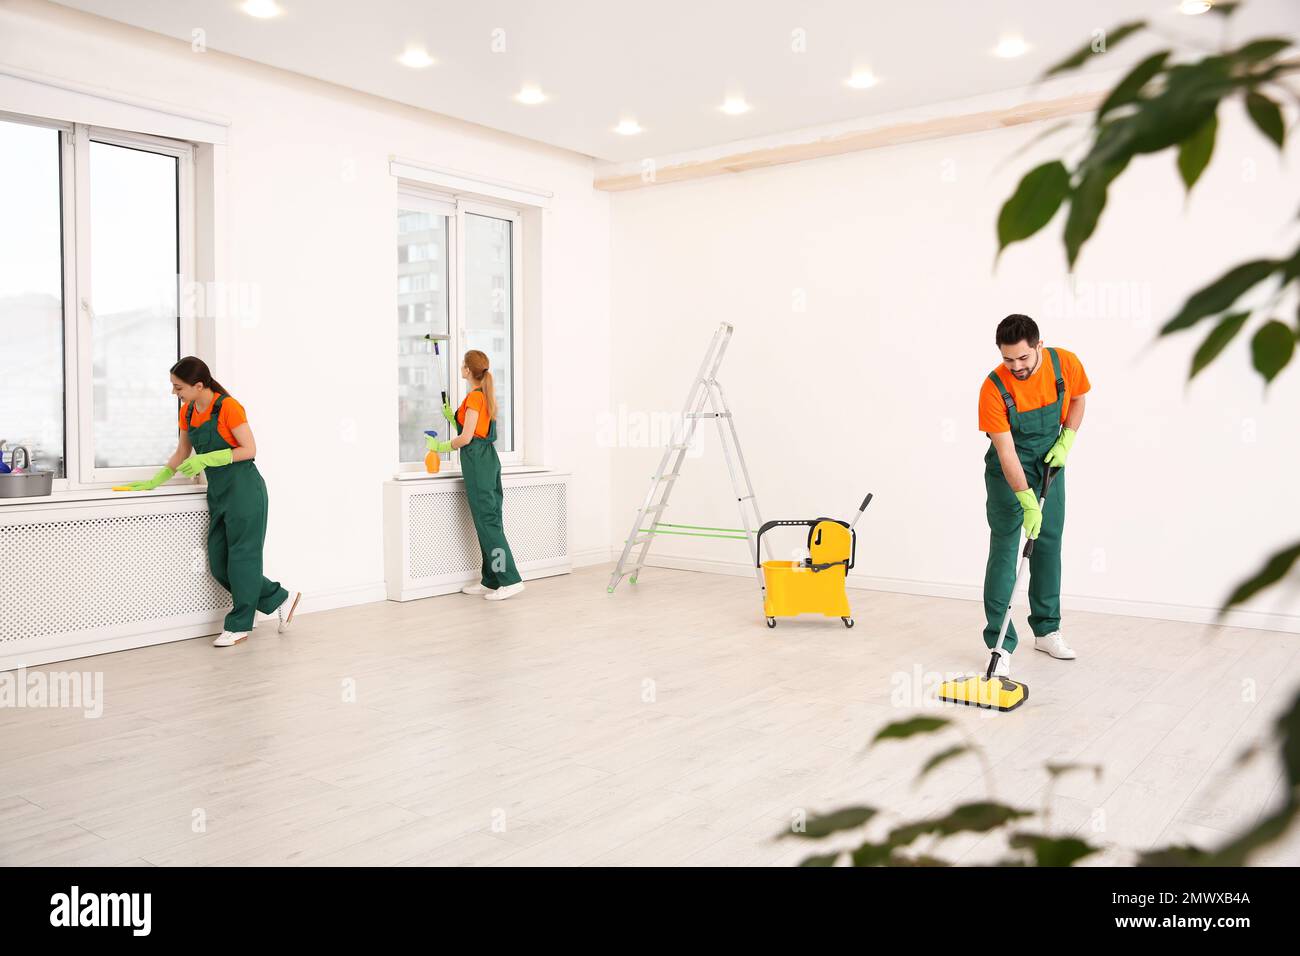 Team of professional janitors in uniforms cleaning room Stock Photo